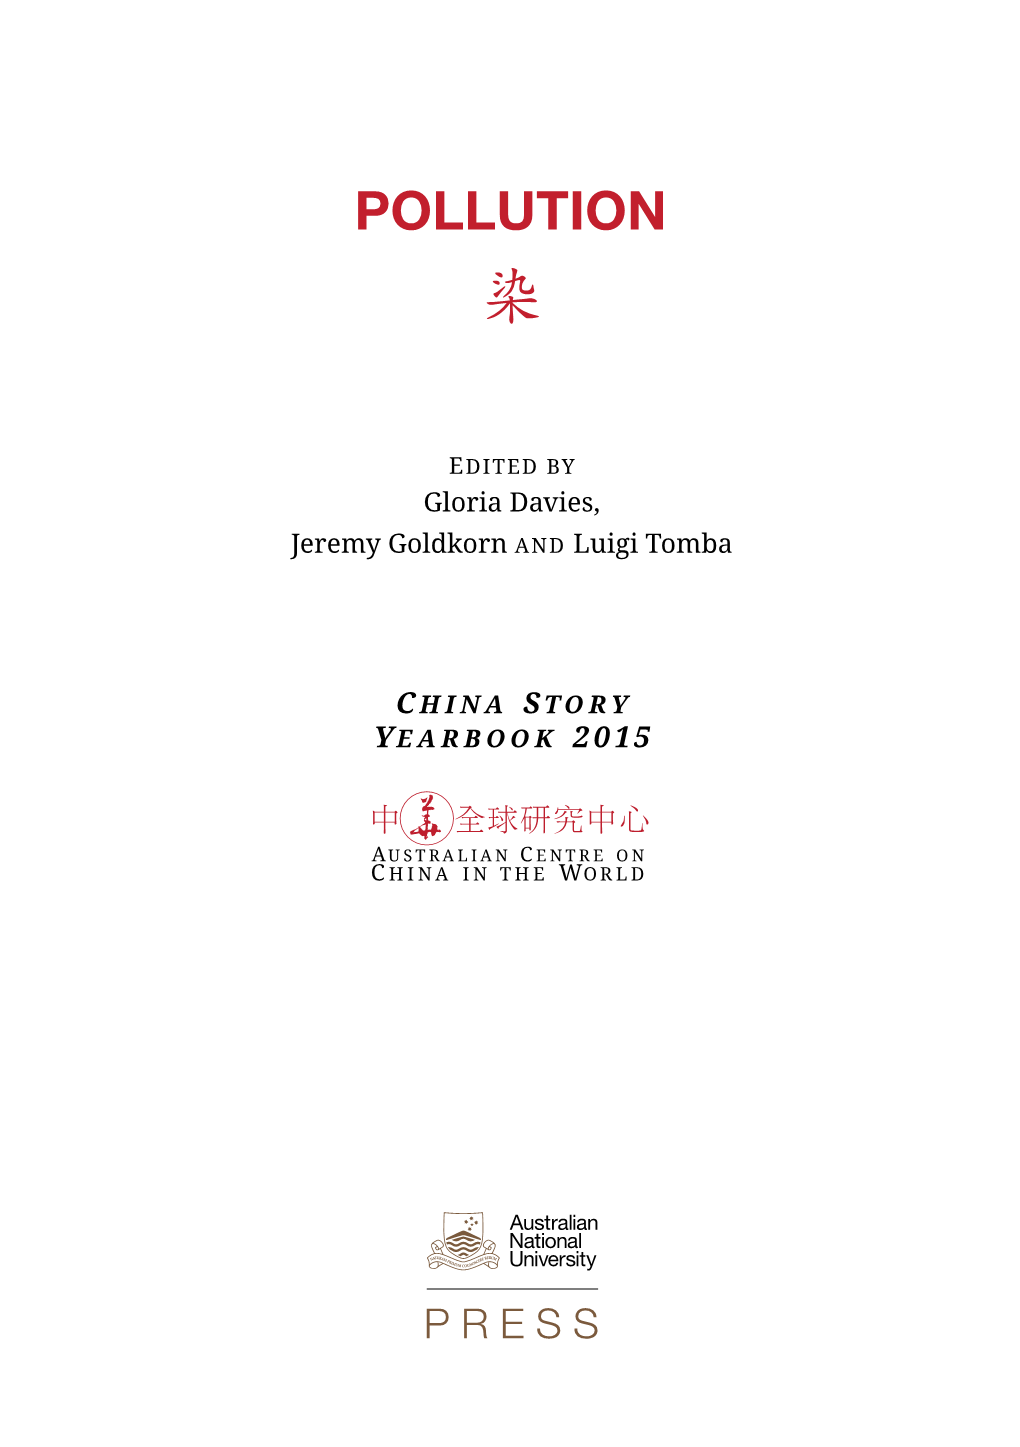 The China Story Yearbook 2015: Pollution